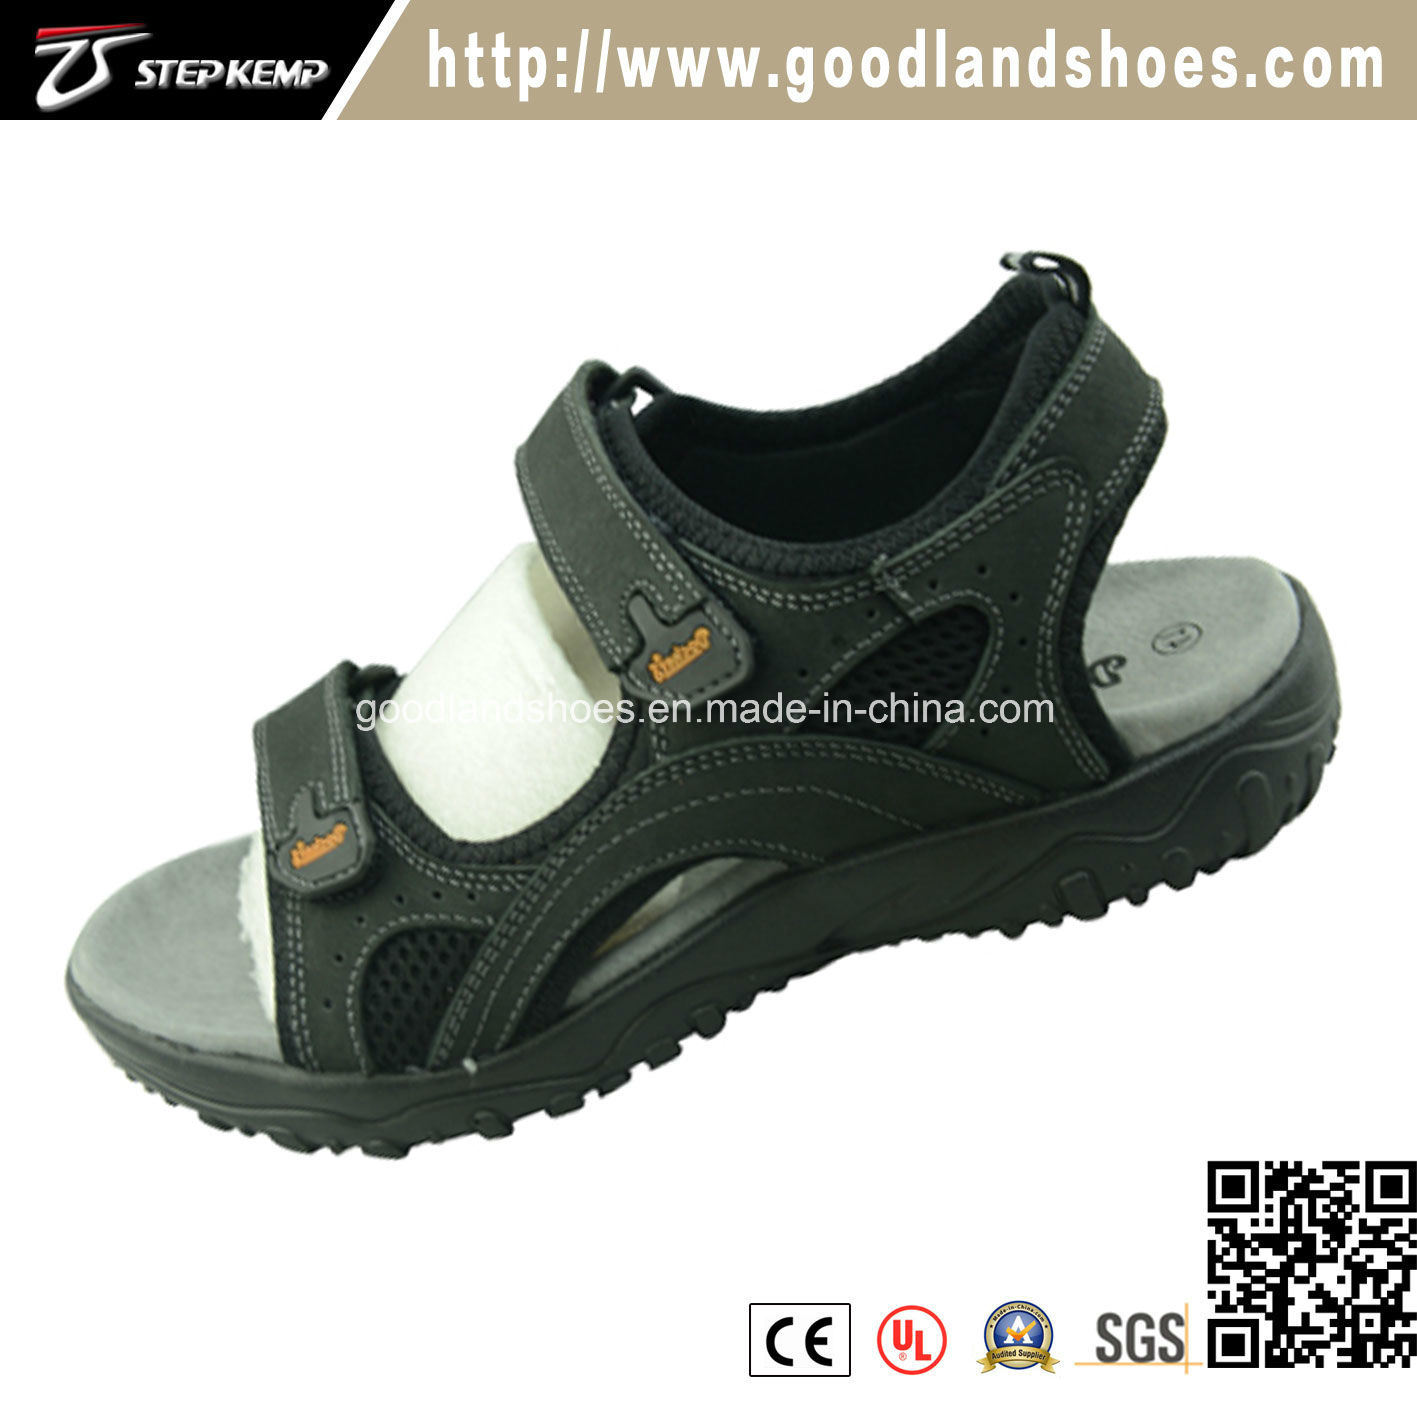 New Fashion Style Summer Beach Breathable Men's Sandal Shoes 20037-1